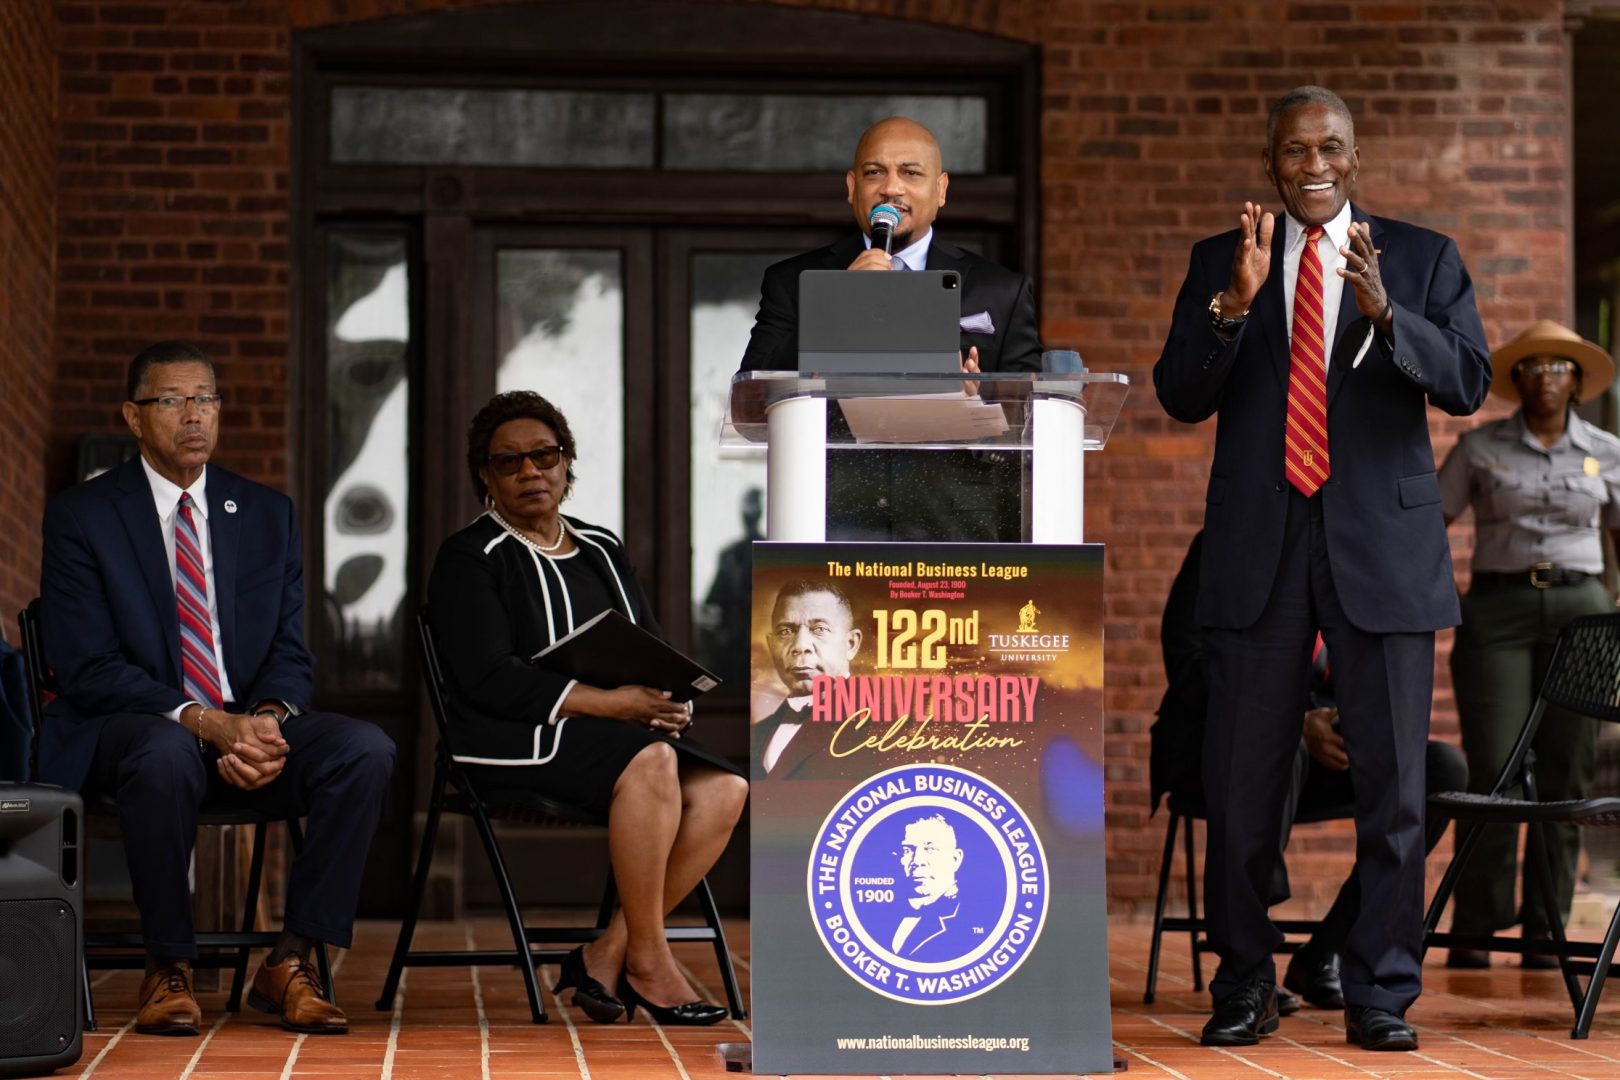 Dr. Ken Harris and The National Business League launch 'Black Economic Freedom Movement' to digitize 1M Black businesses by 2028